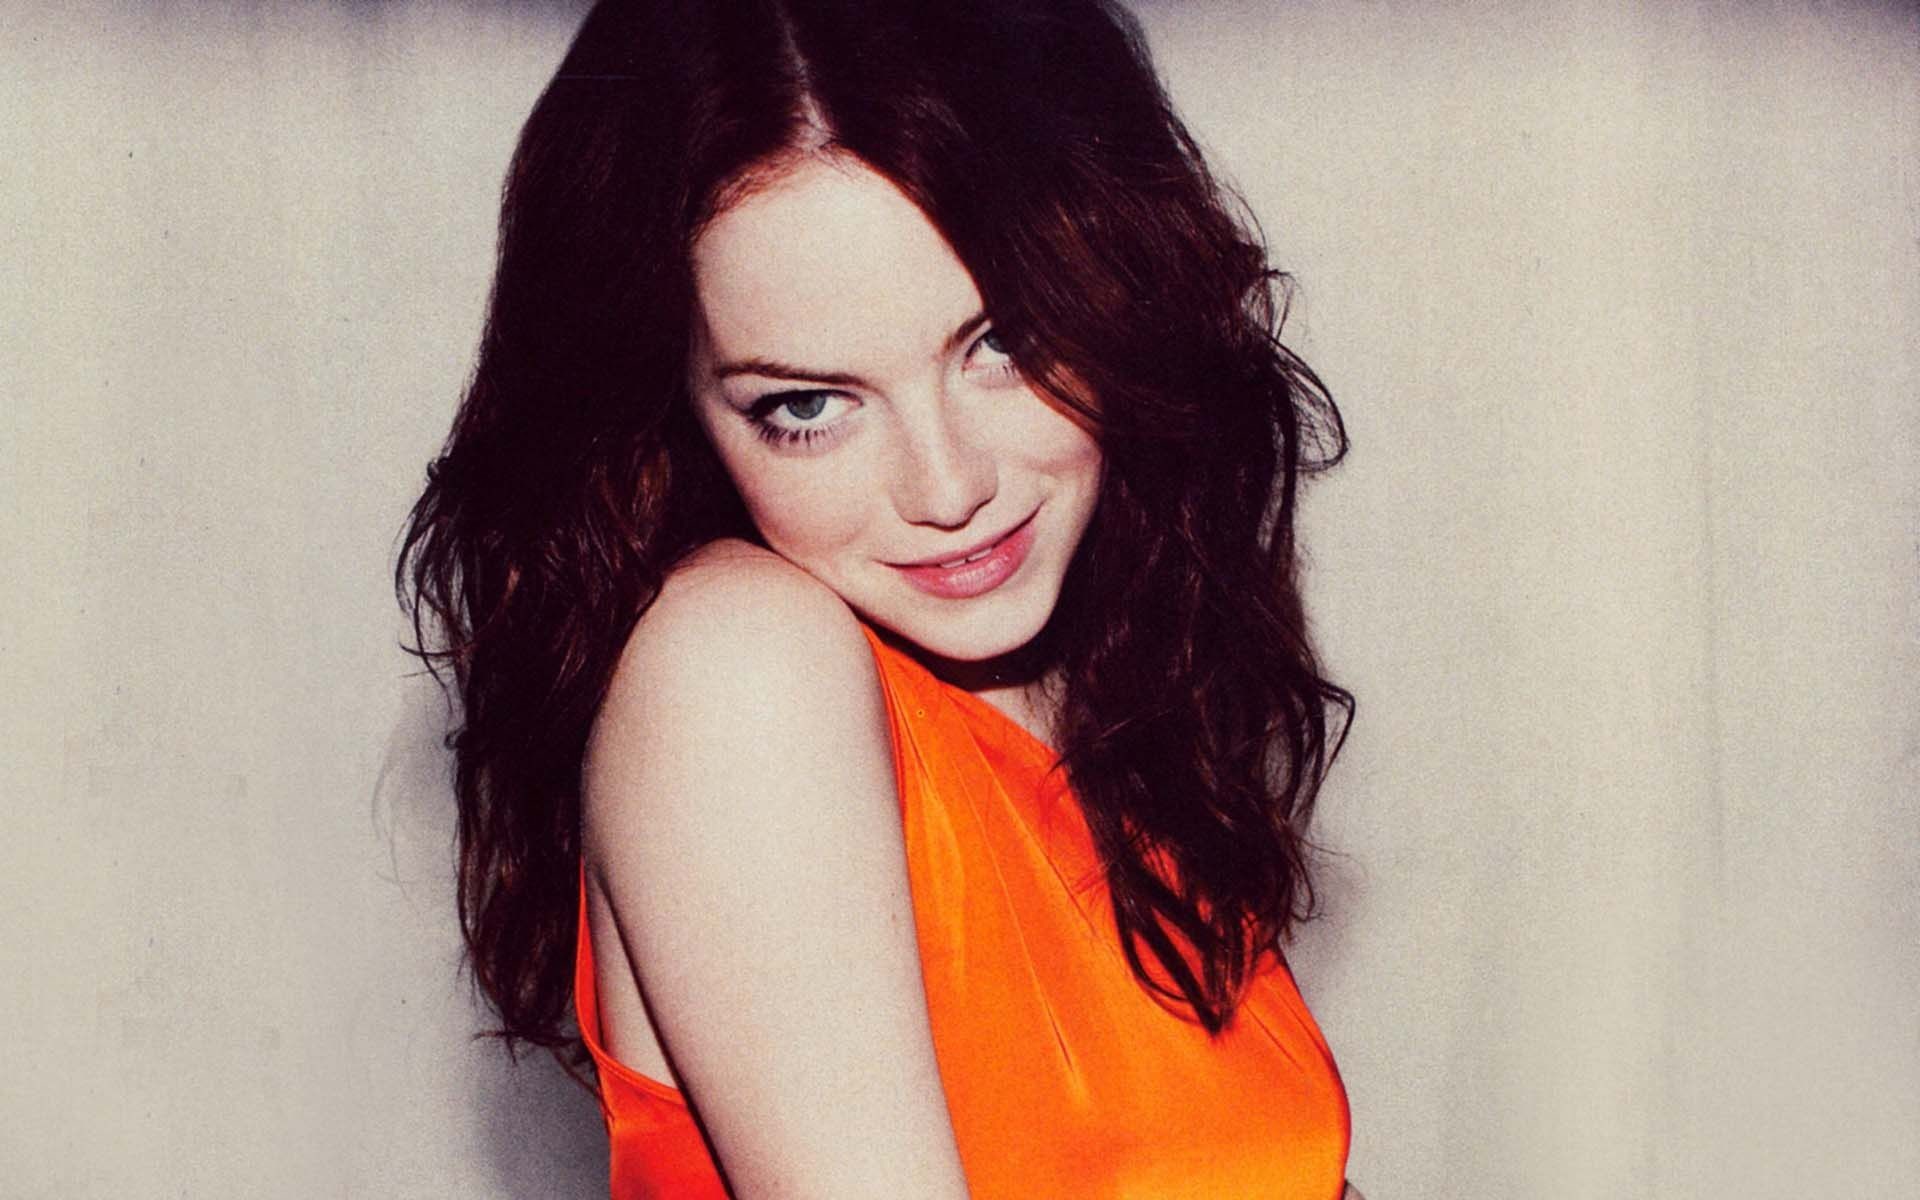 Emma Stone HD Images Gallery